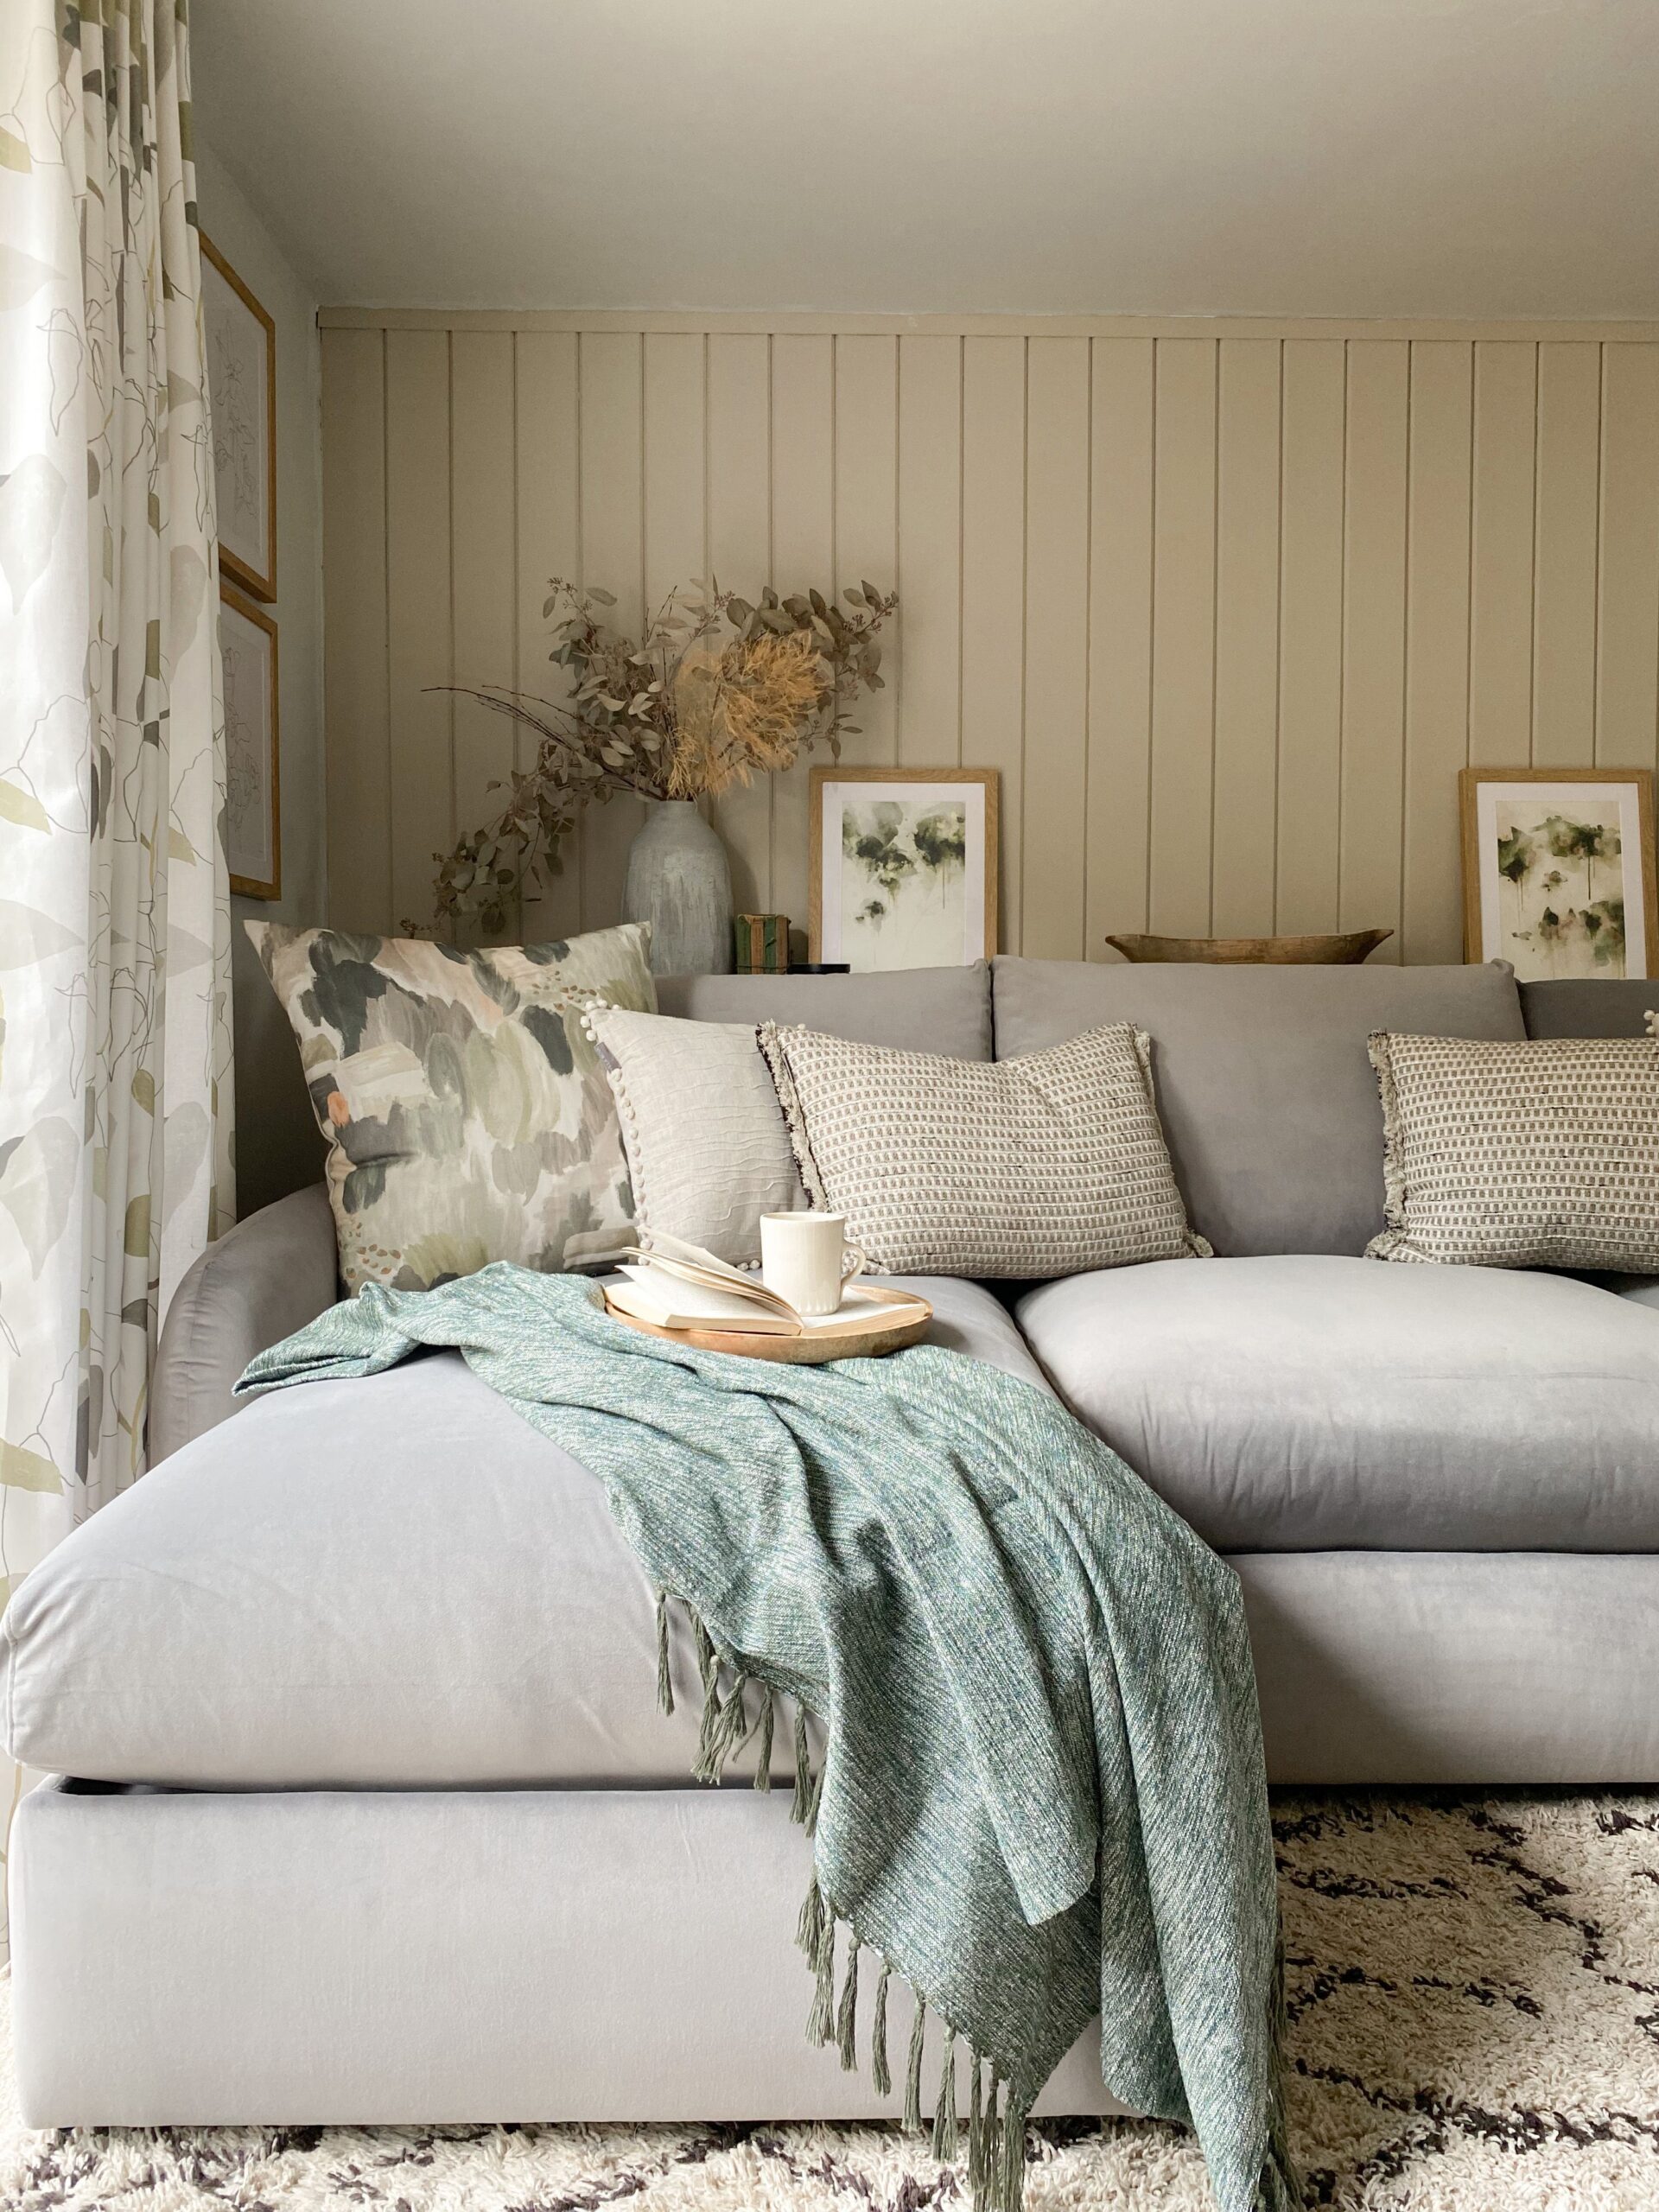 Buy a small corner sofa to get a bigger
look of the room